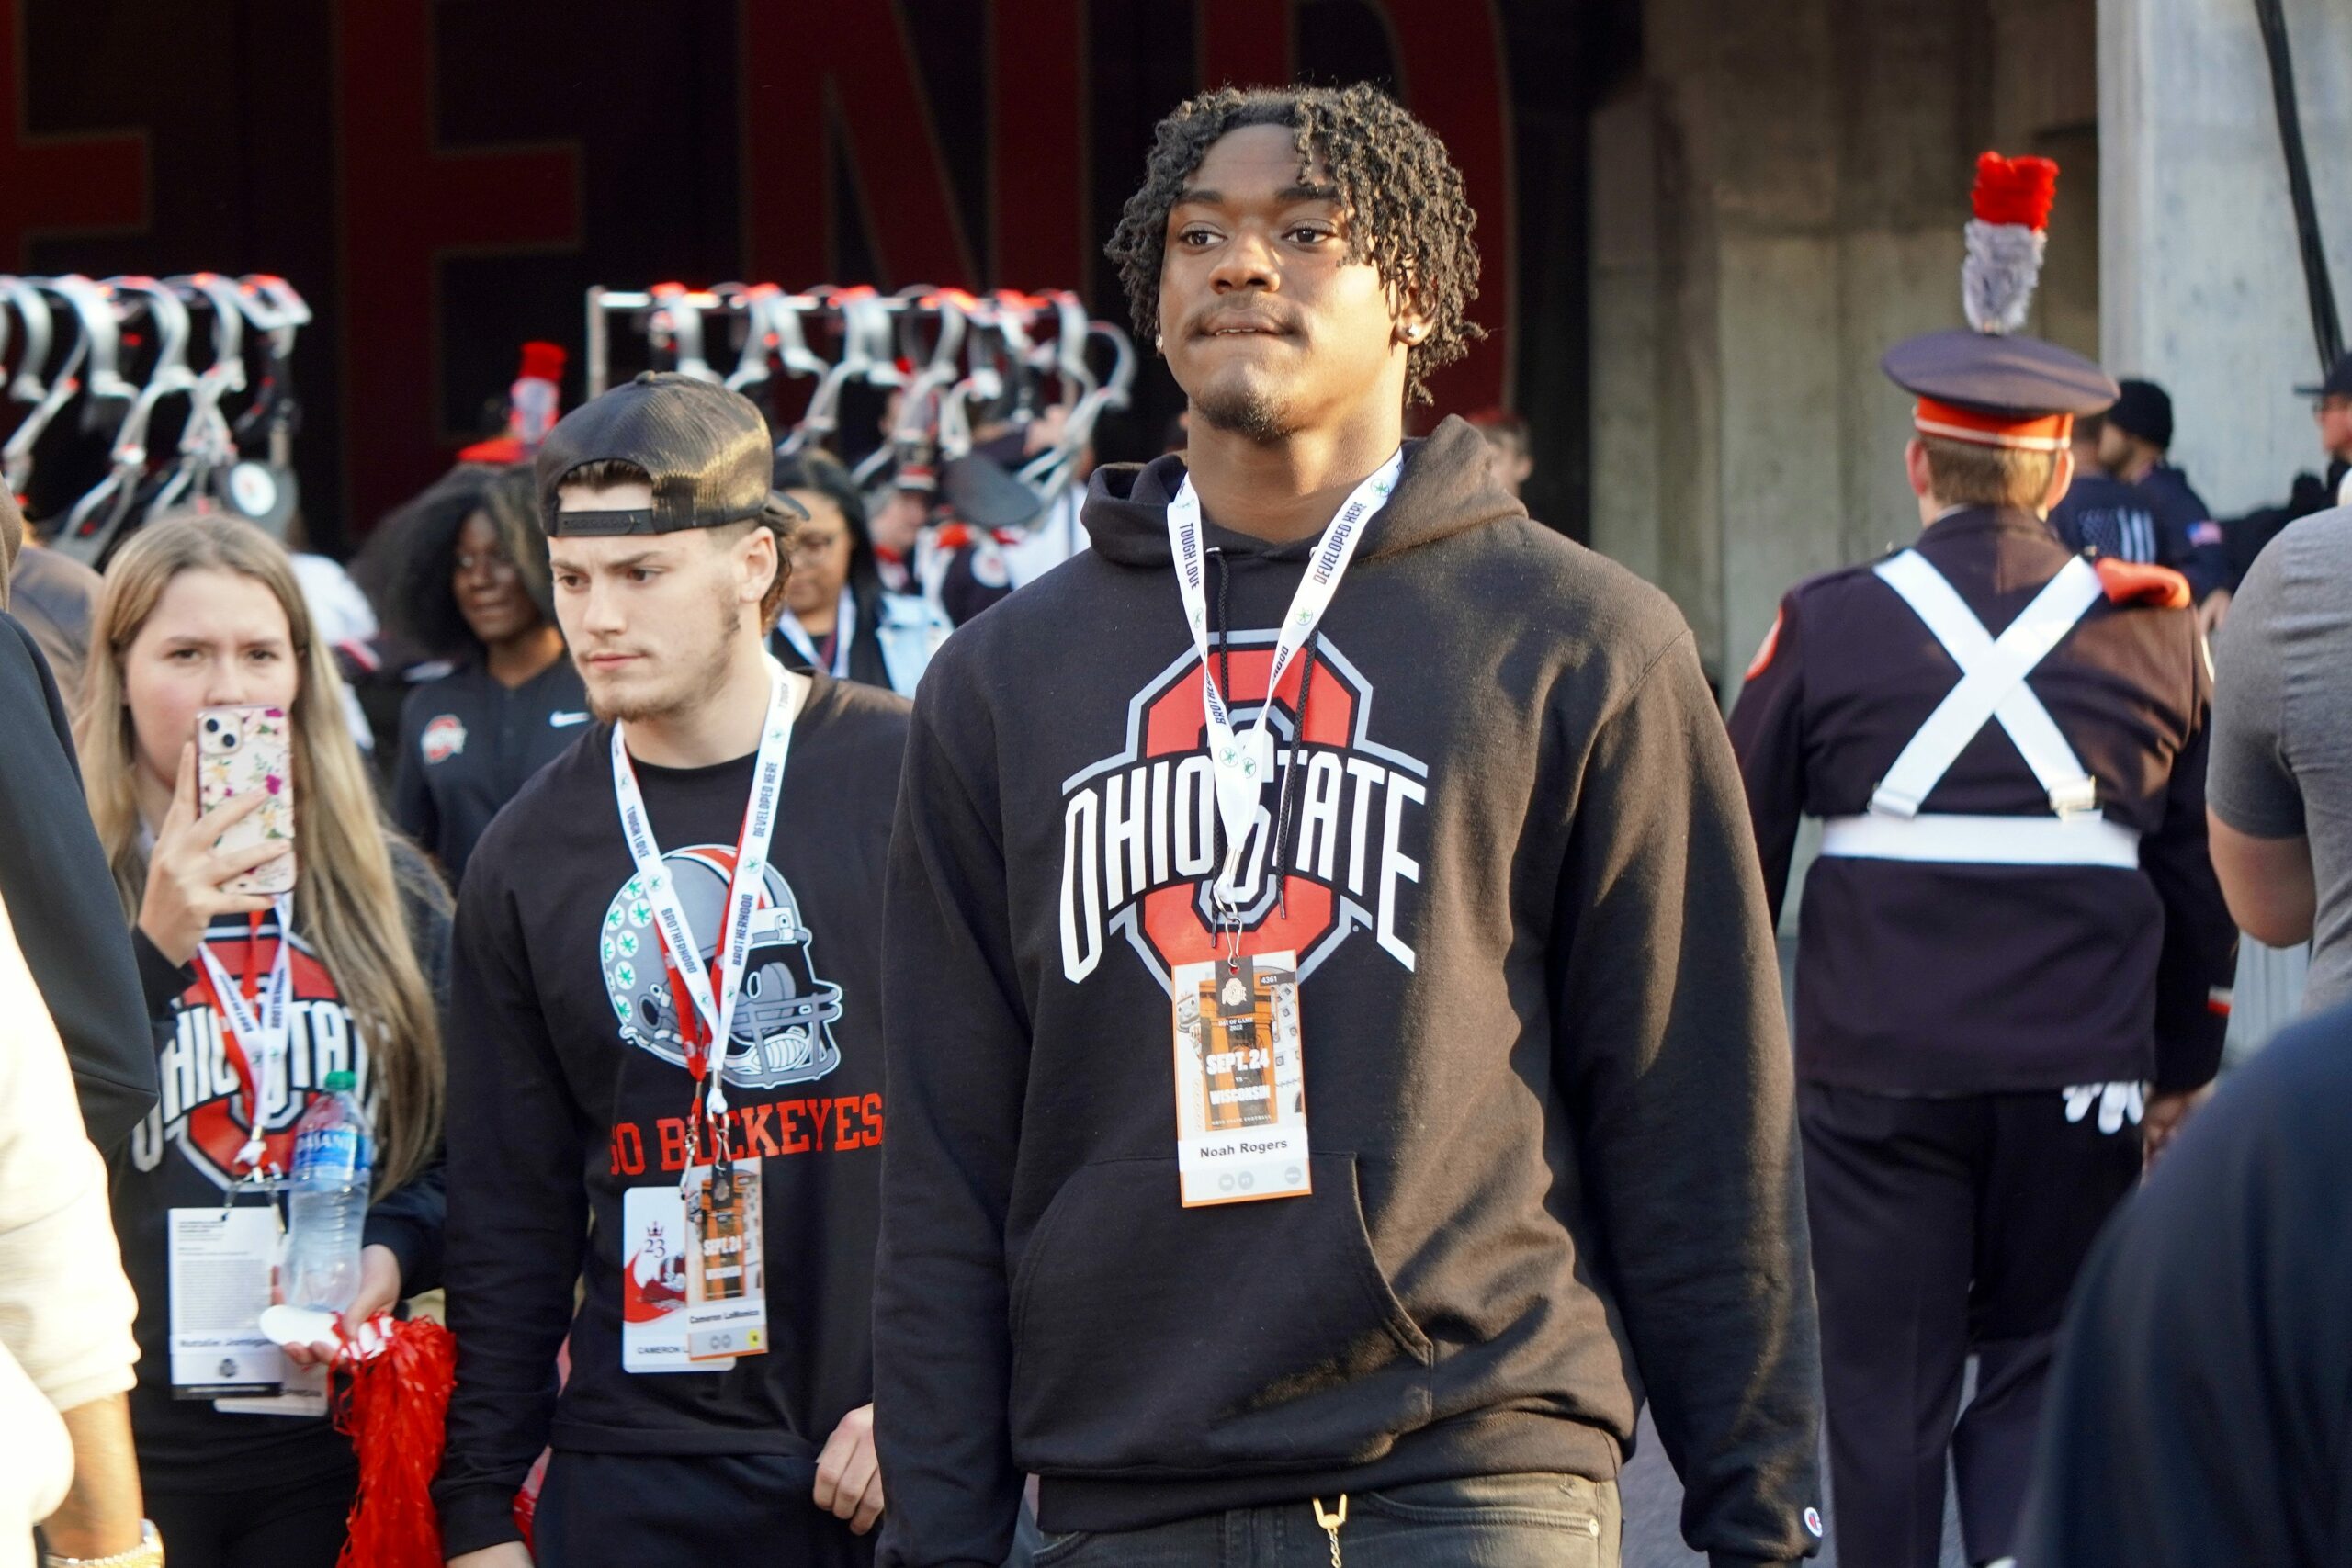 247Sports gives a report on Ohio State WR Noah Rogers performance at Under Armor All-American Bowl